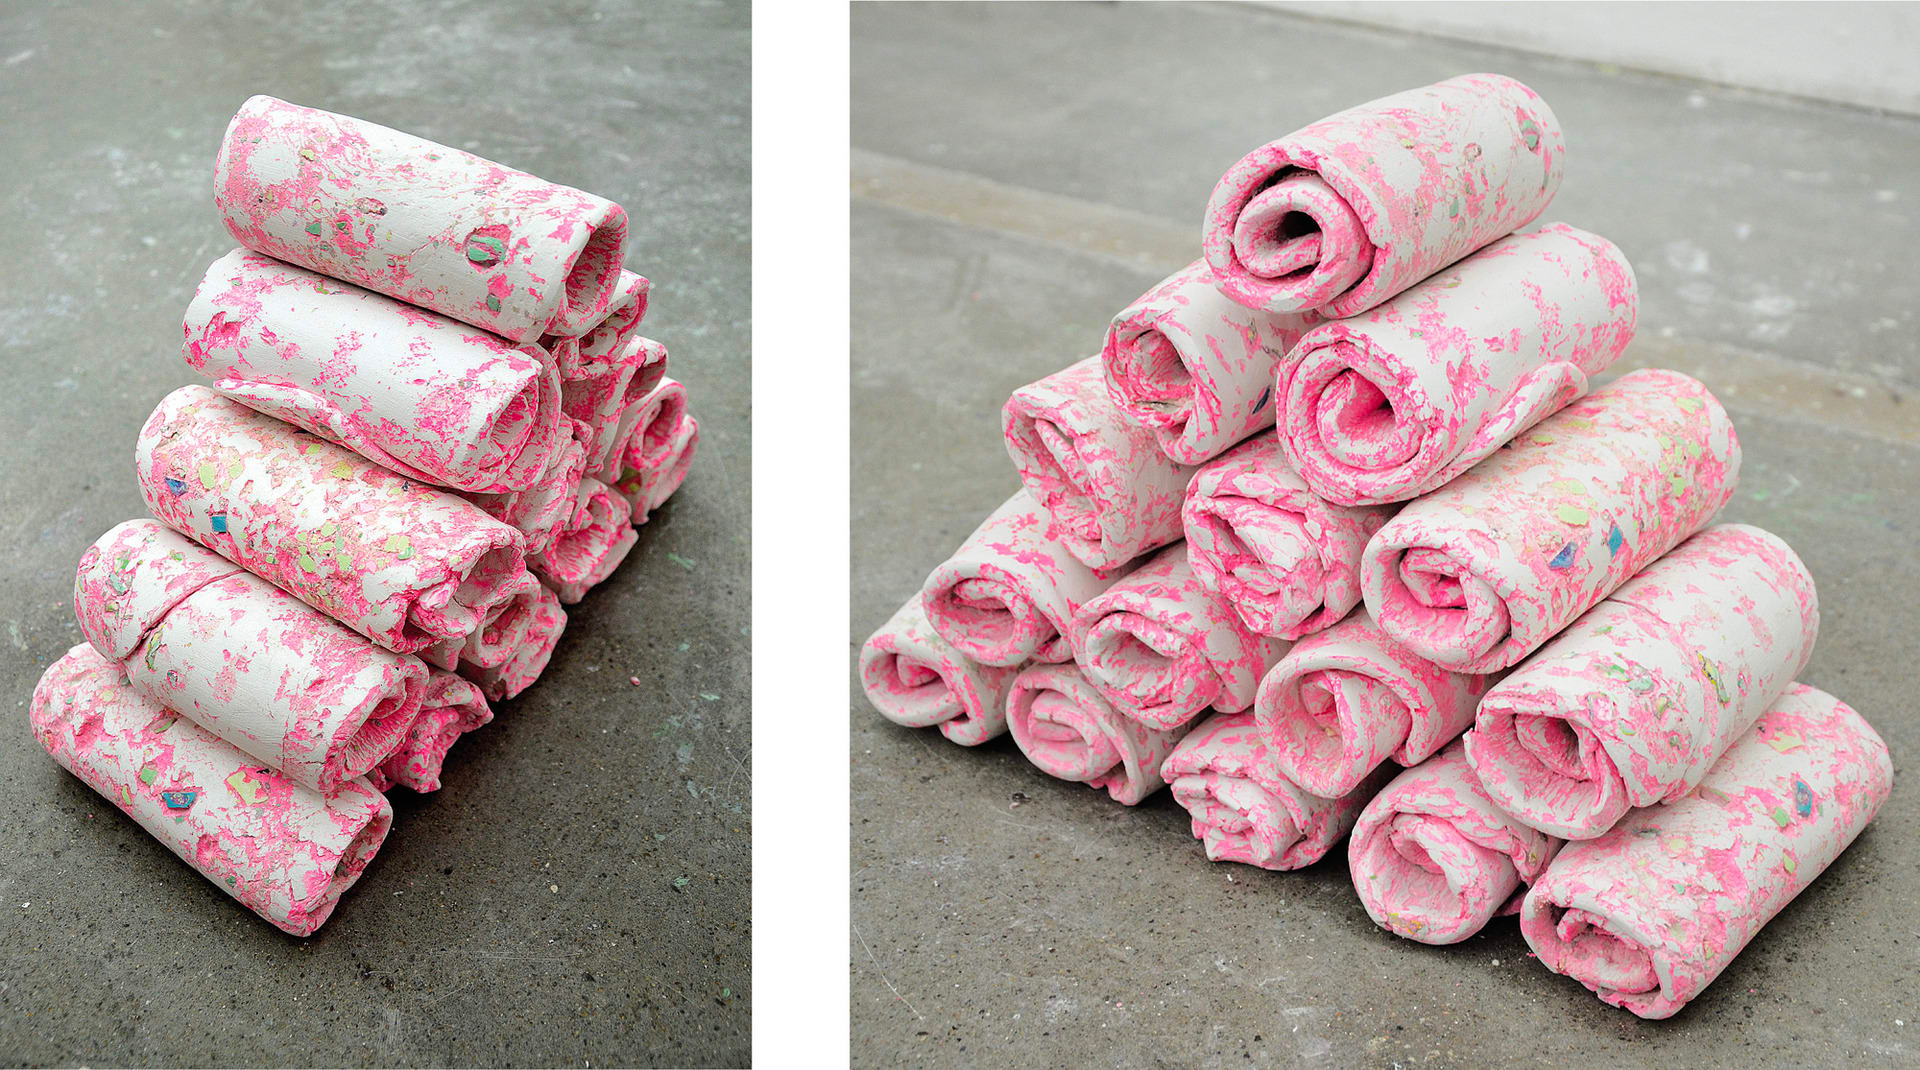 Two photographs of cylindrical rolls of a soft, pink and white material stacked in a pyramid on a concrete floor, taken from different angles.